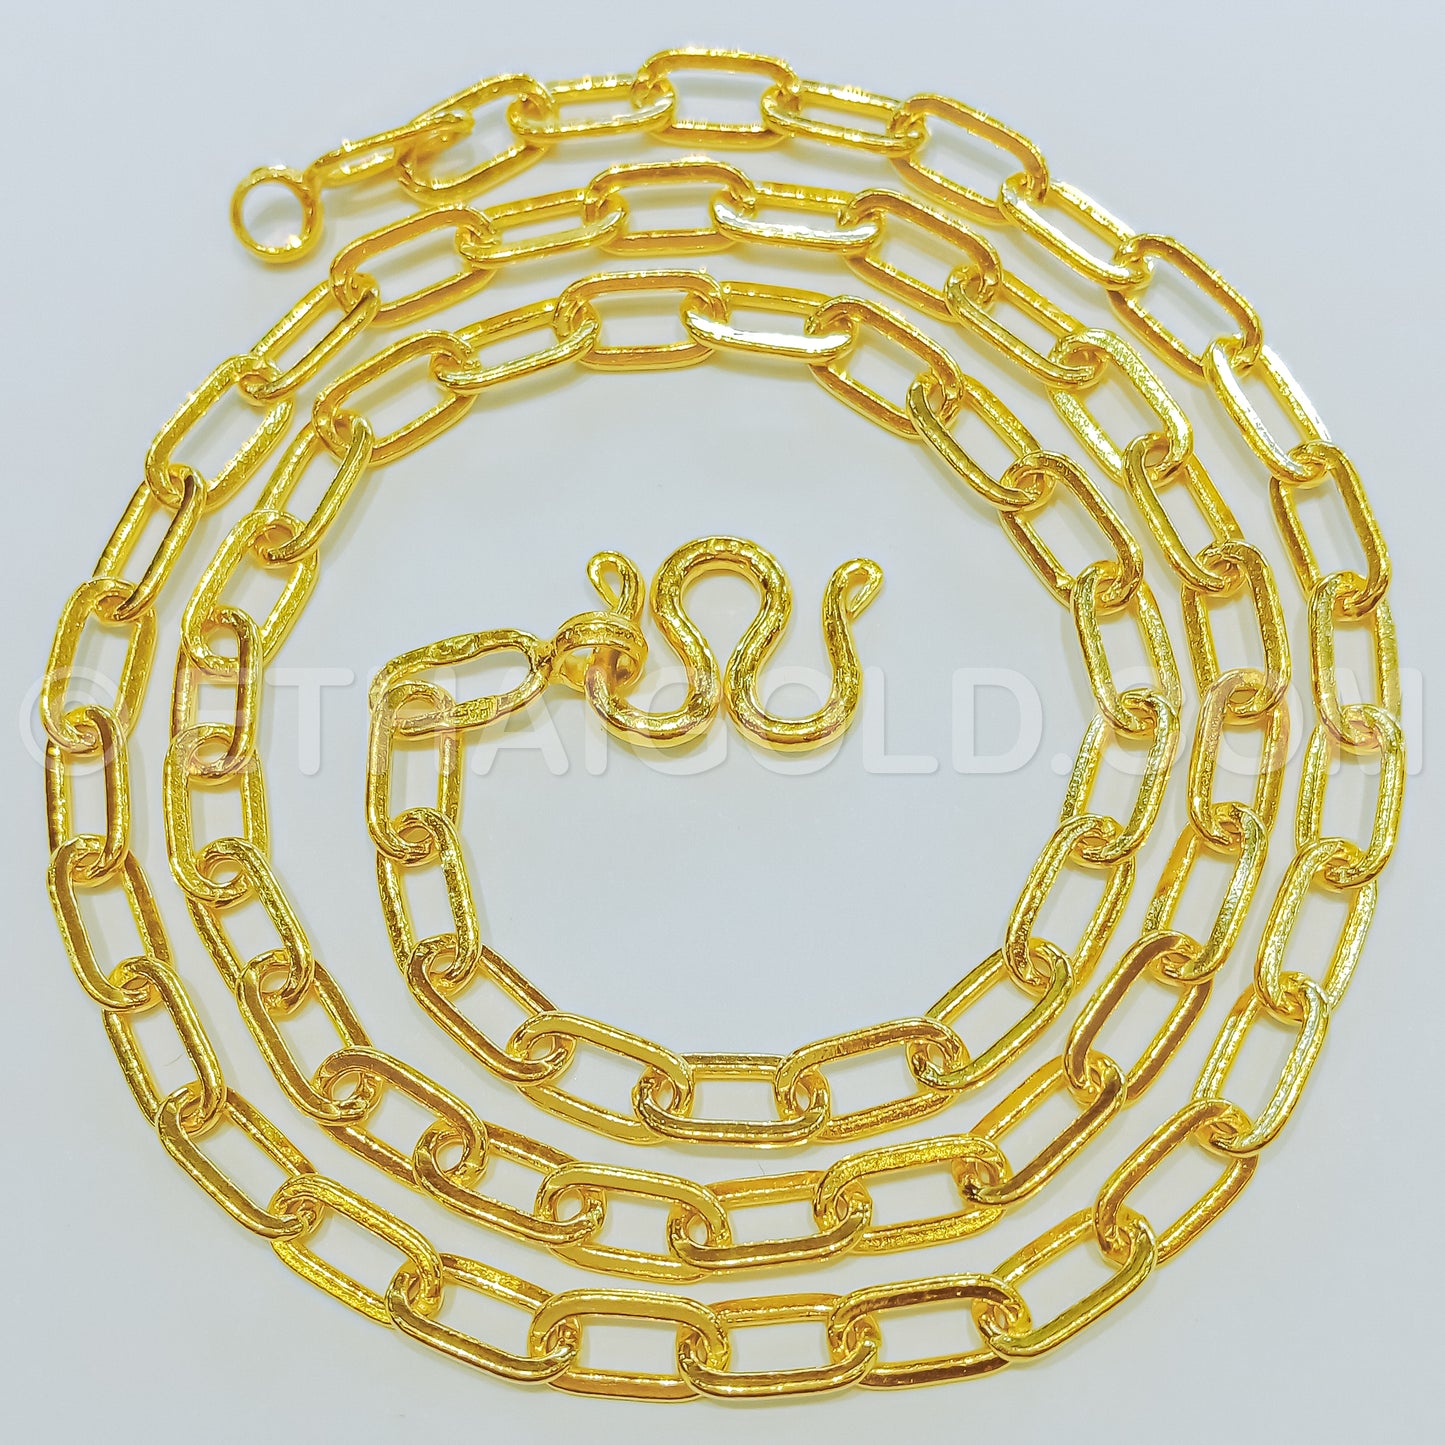 5 BAHT POLISHED SOLID LONG FLAT CABLE CHAIN NECKLACE IN 23K GOLD (ID: N0105B)